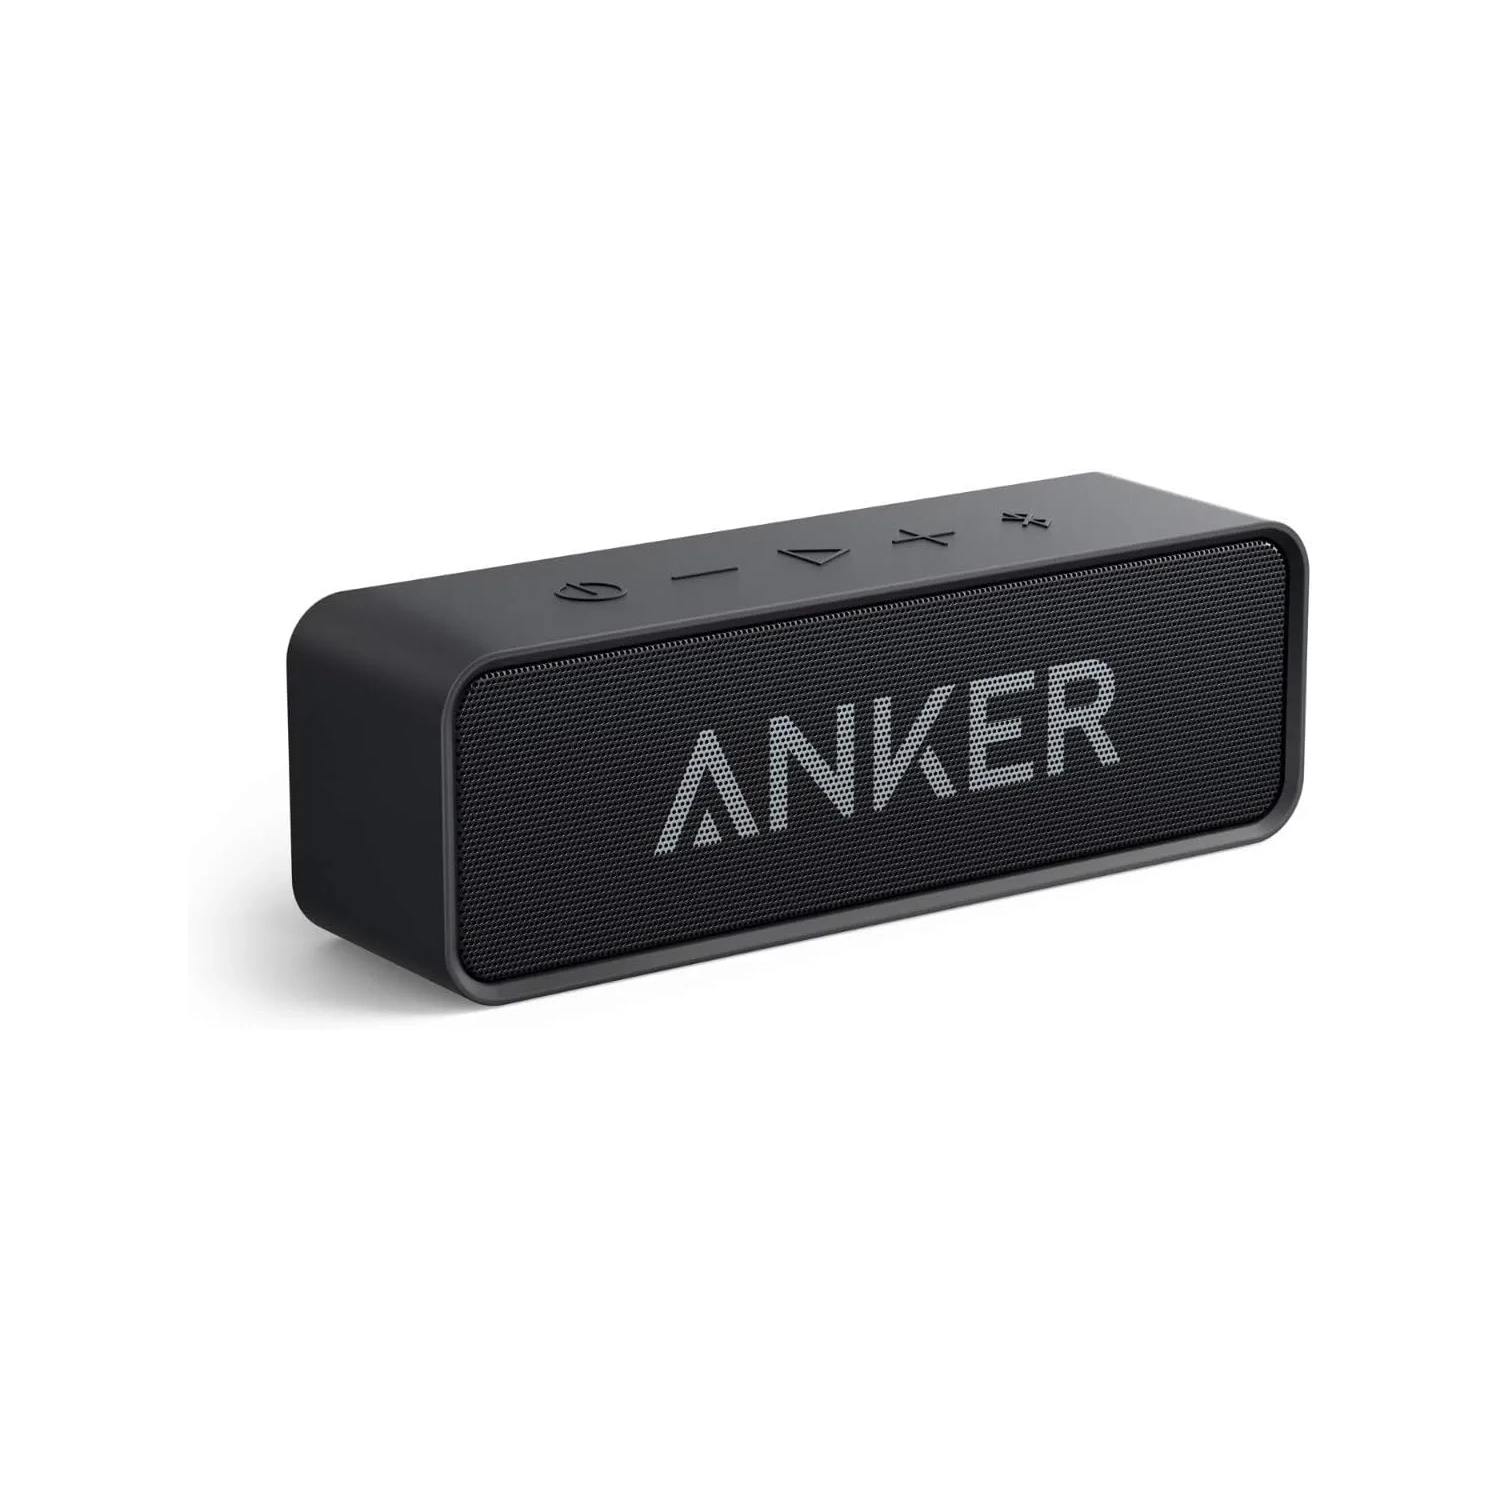 Anker Soundcore Bluetooth Speaker - Upgraded, IPX5 Waterproof, Stereo Sound, 24H Playtime, Portable Wireless Speaker for iPhone, Samsung, and More